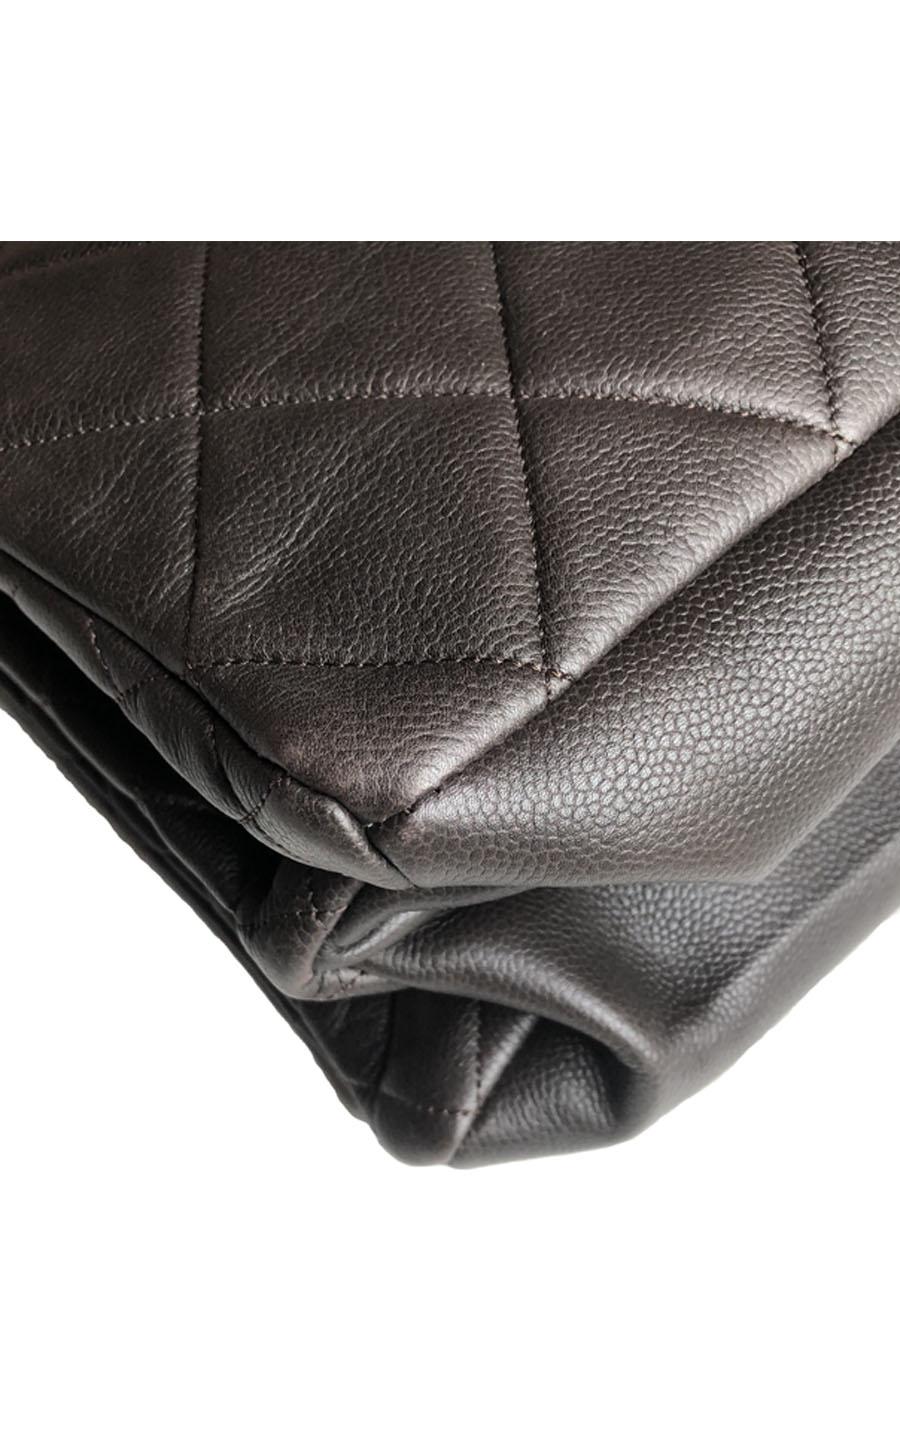 Chanel Quilted Dark Brown Caviar Leather Tote For Sale 6